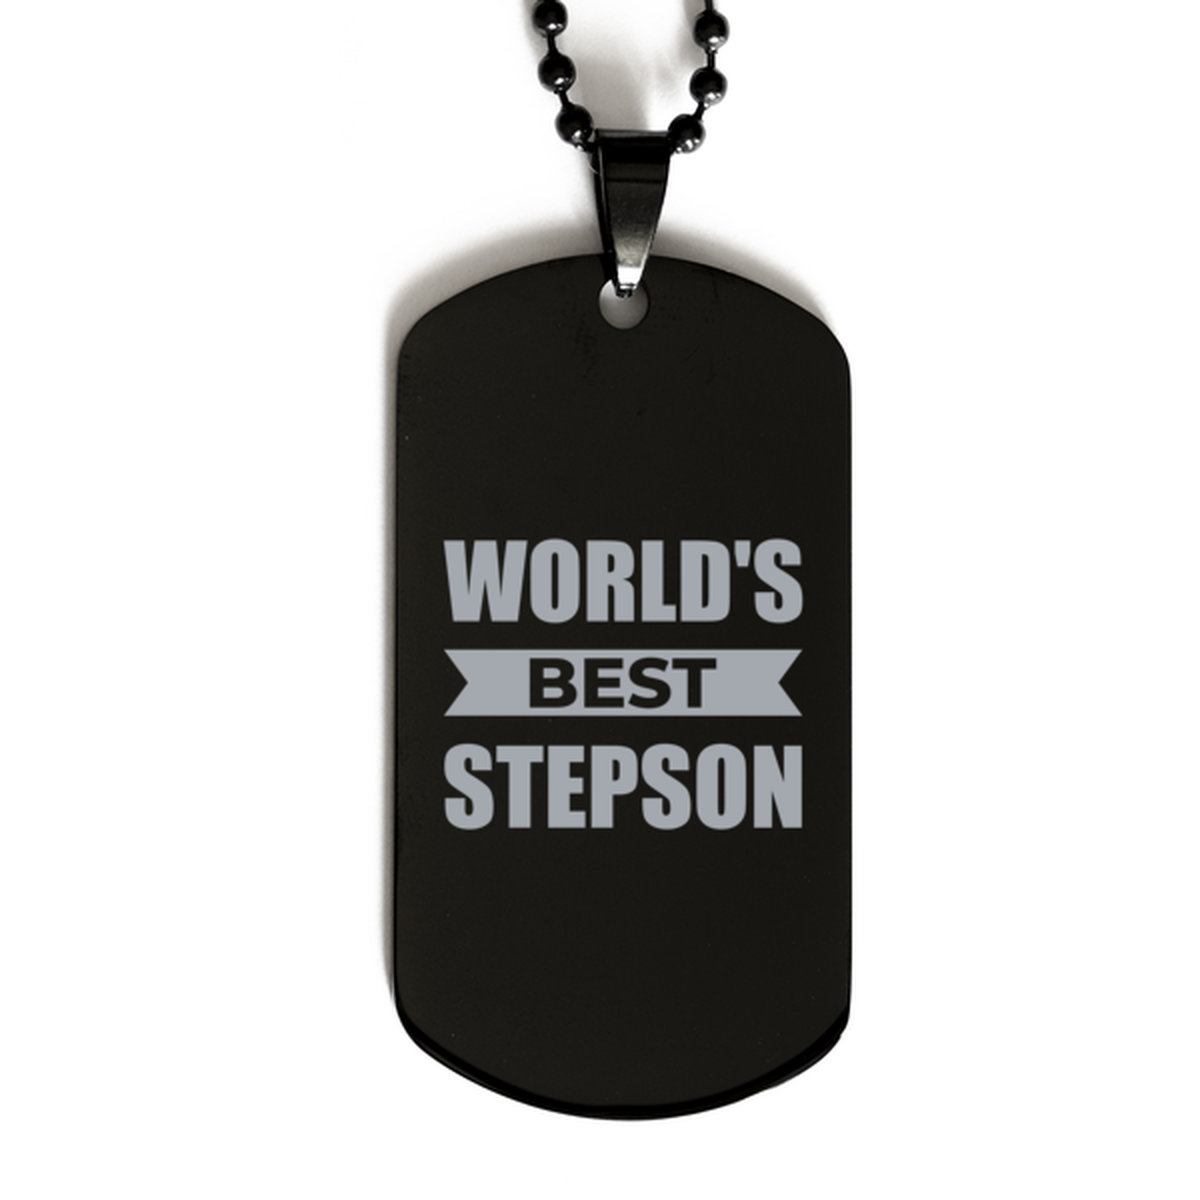 Worlds Best Stepson Gifts, Funny Black Engraved Dog Tag For Stepson, Birthday Presents For Men